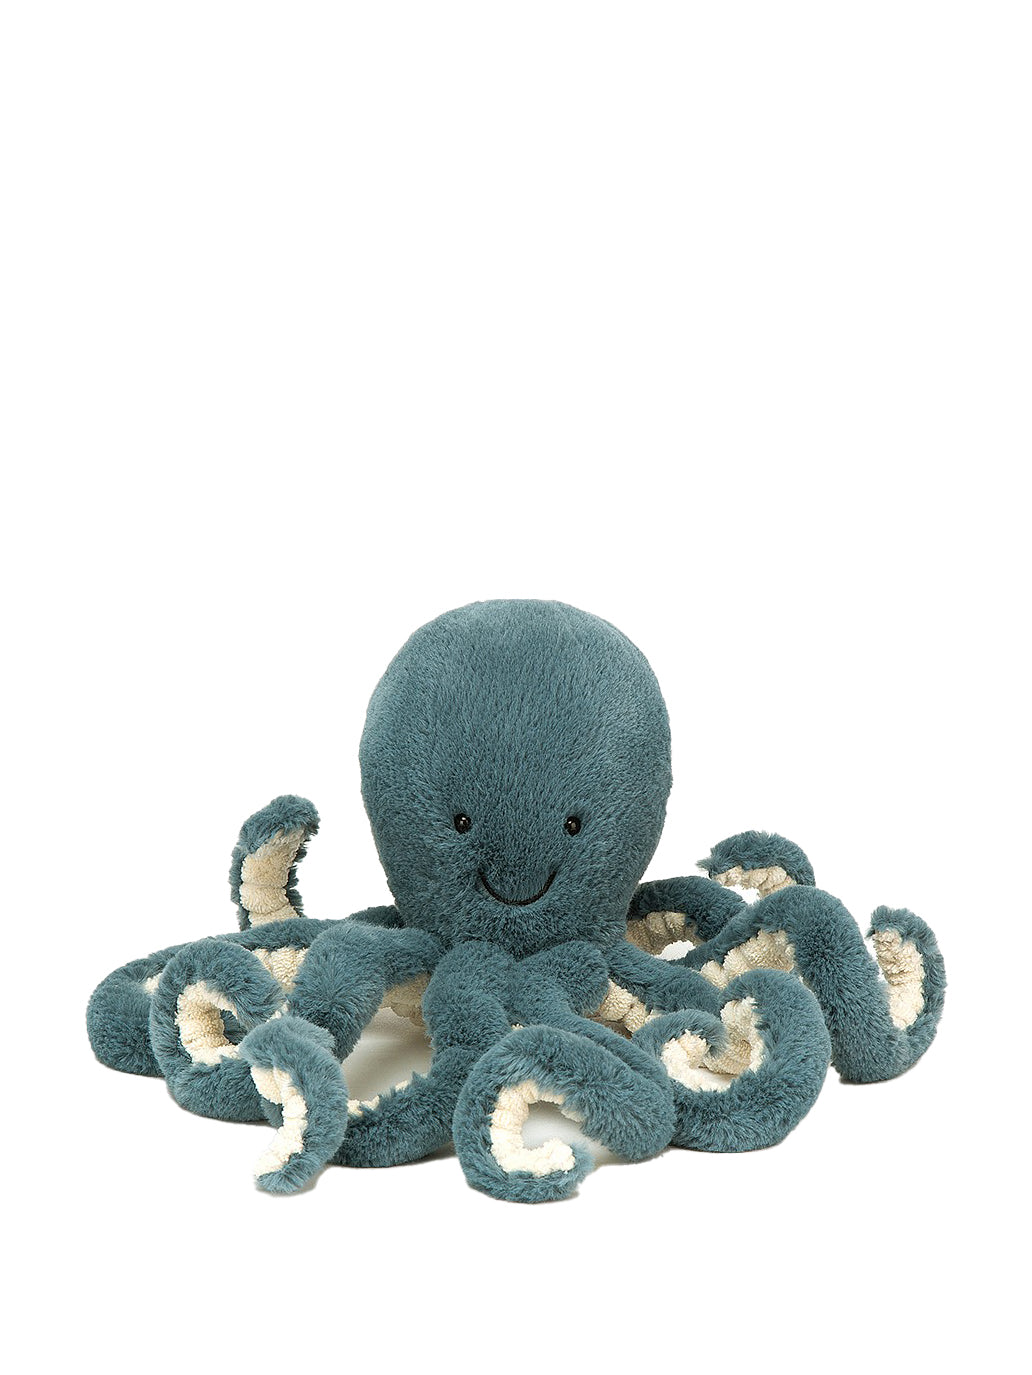 Storm Octopus, small